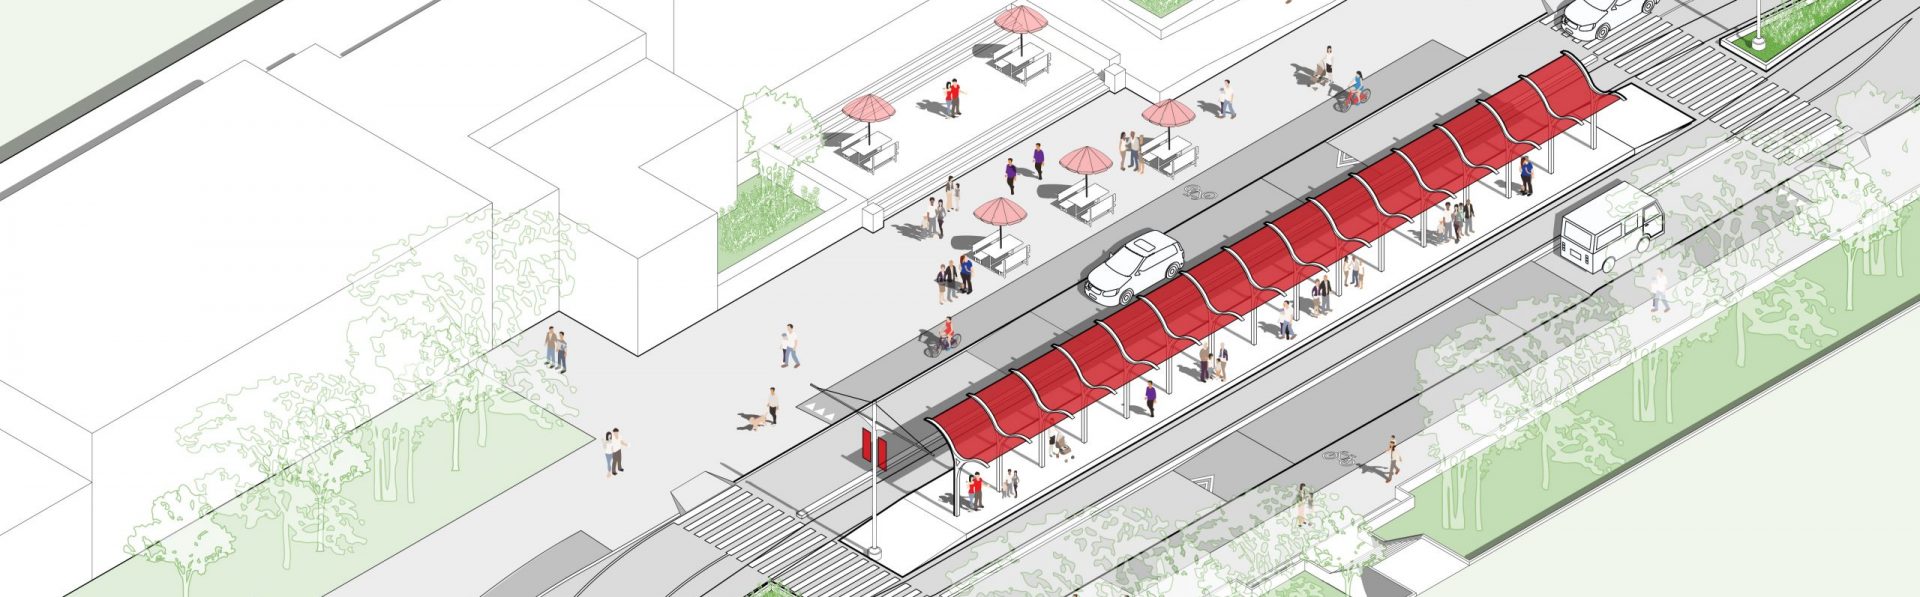 3 Street Plans Projects Nominated for the People’s Choice Awards